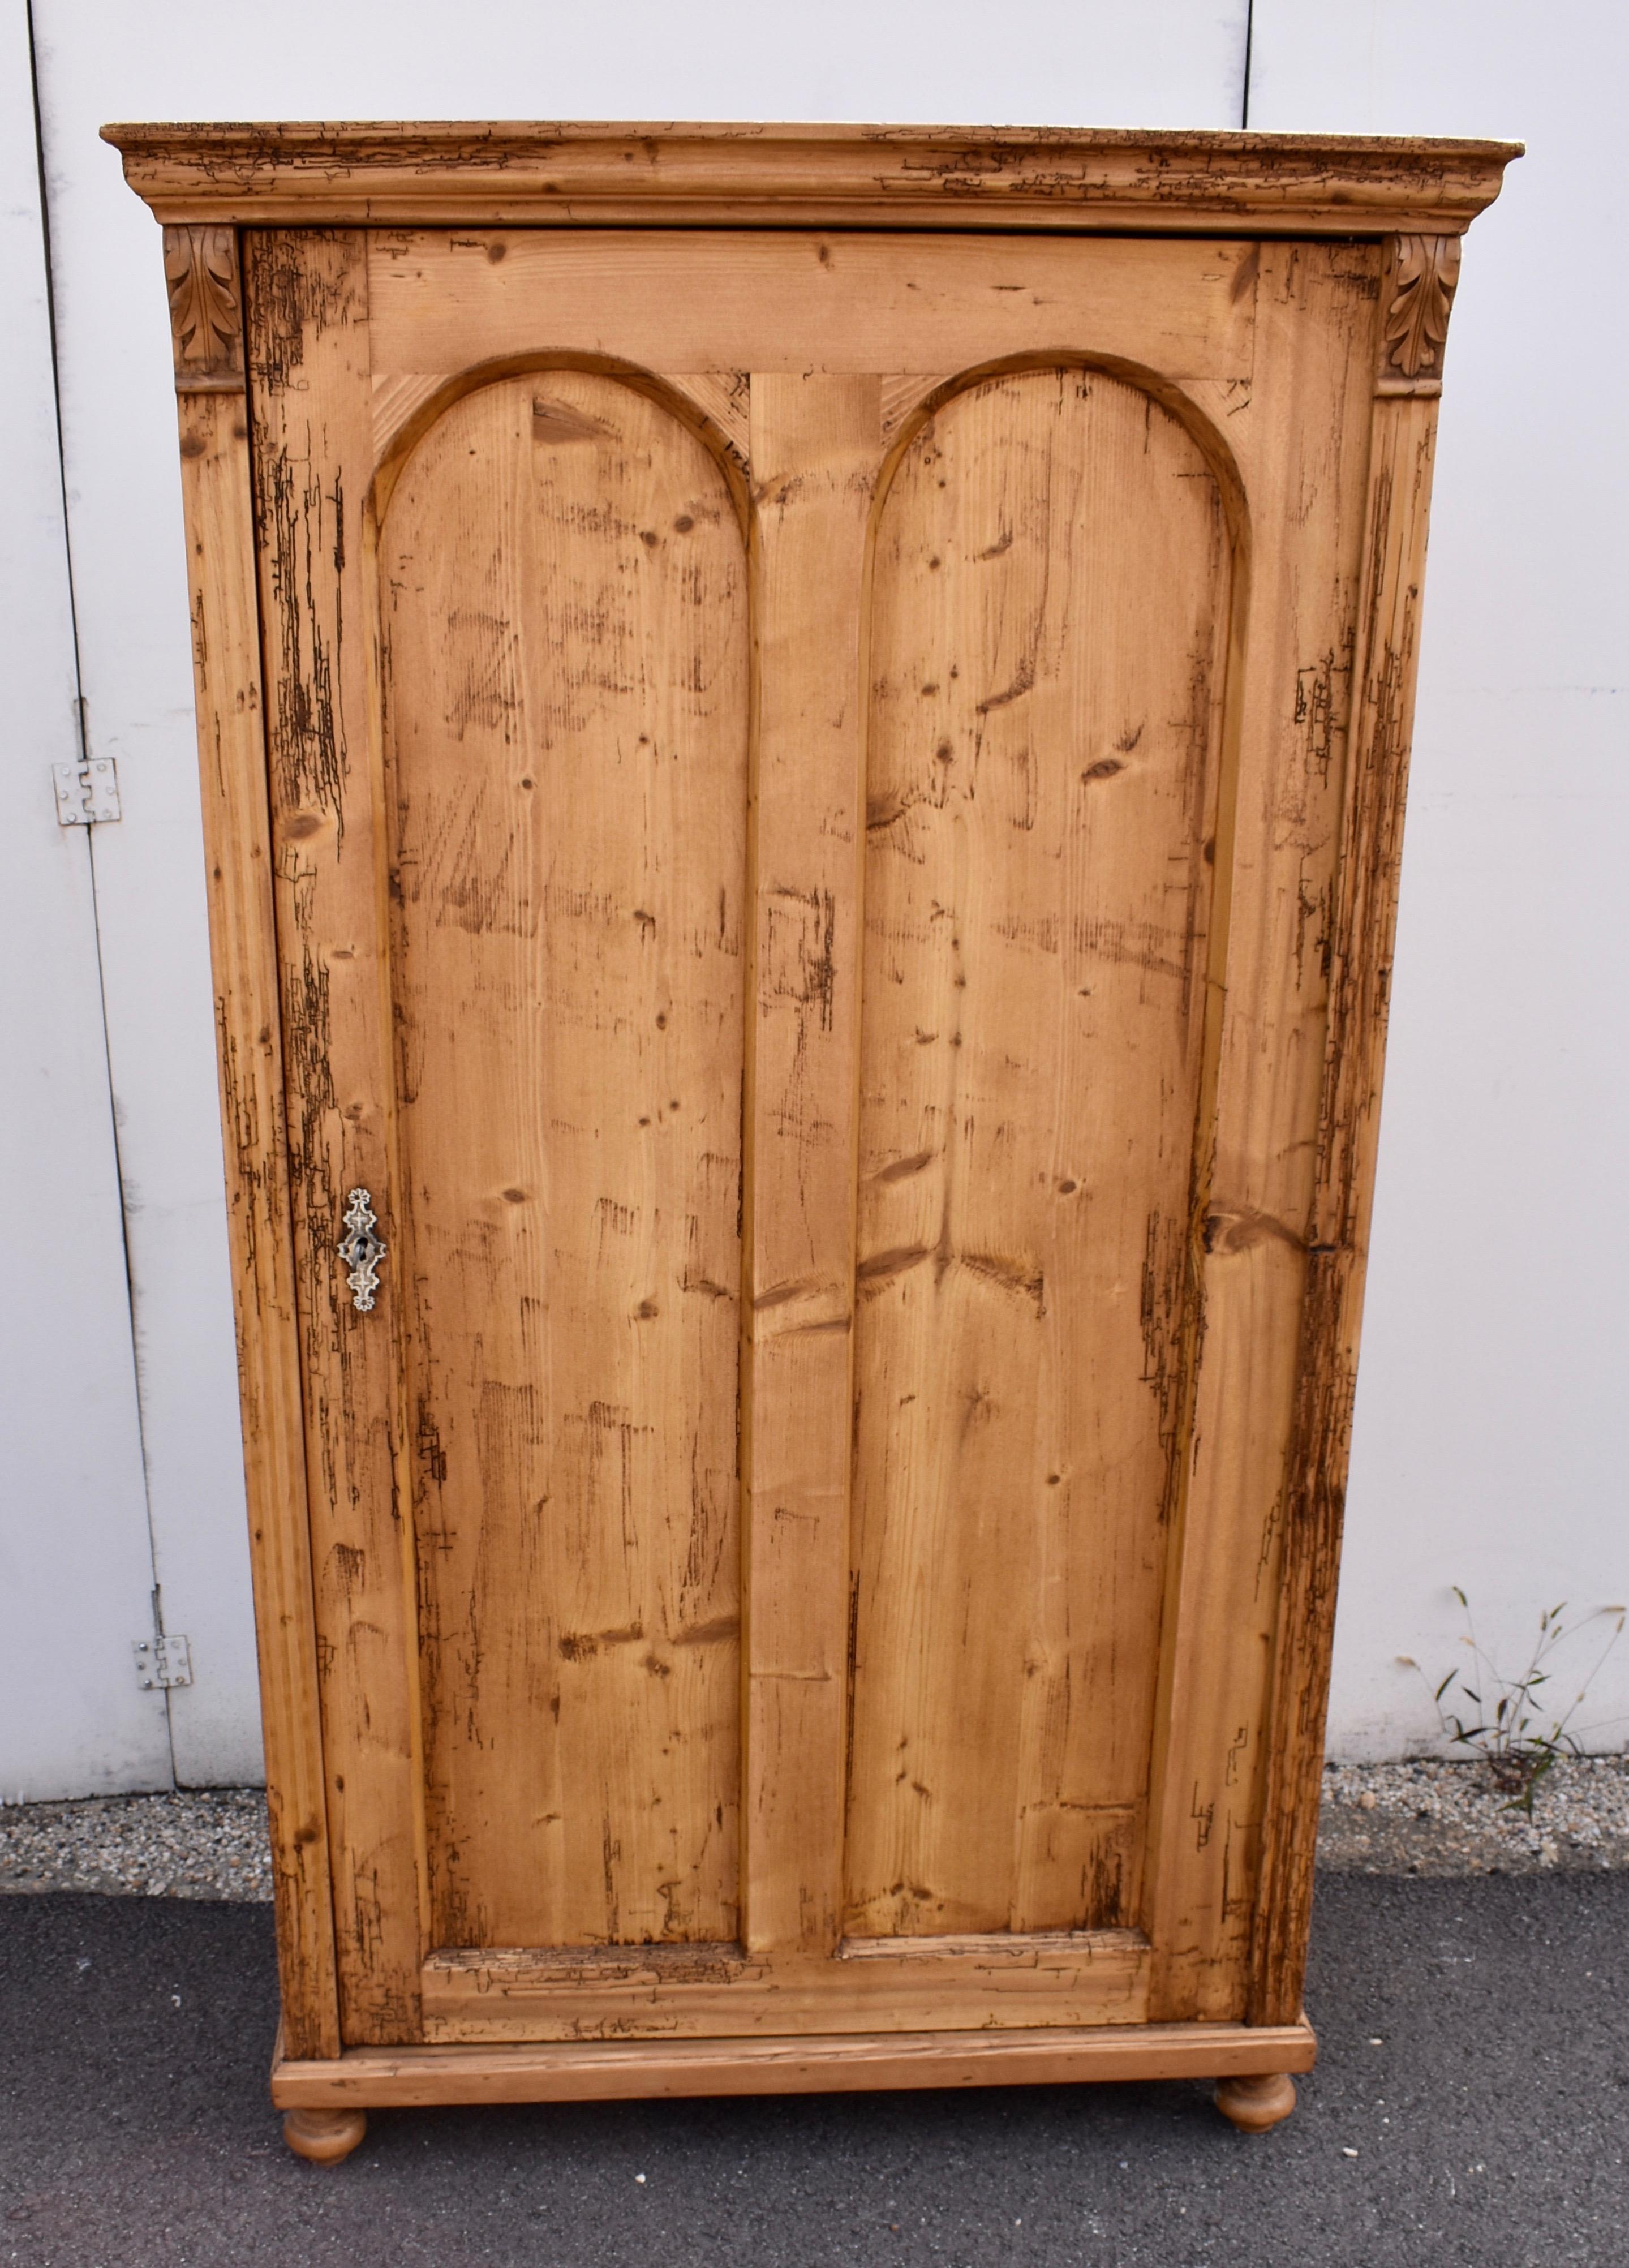 This single door armoire has extensive woodworm tracks, guaranteed to be inactive.
The crown molding is substantial and the ten inch crest with the central hardwood floral applique that surmounts it is easily removed.  The door has two long flat